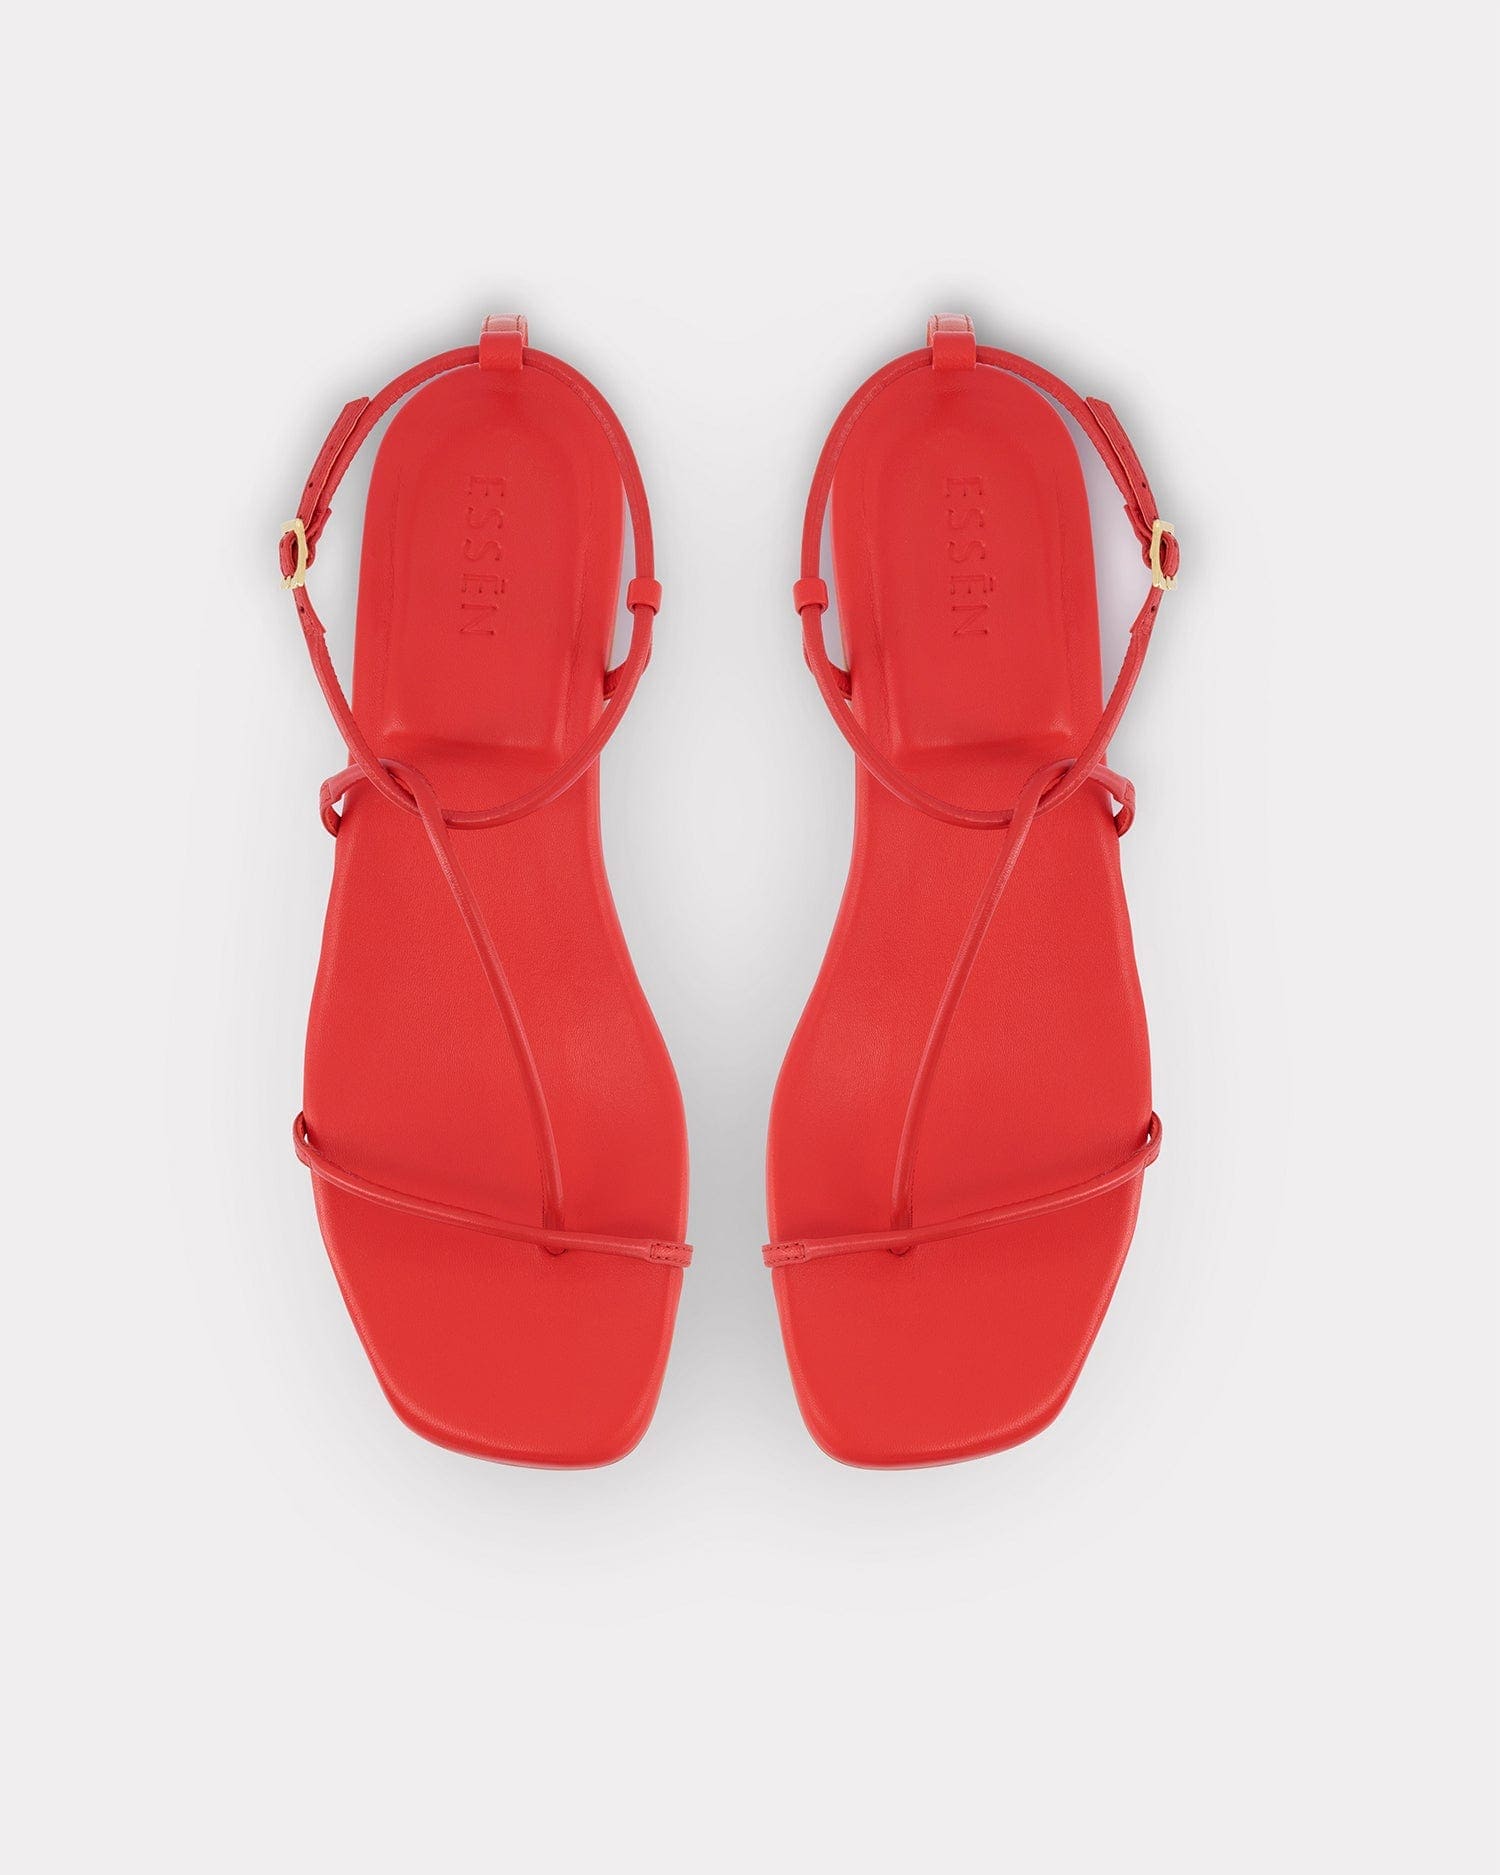 elegant strappy summer sandals in red leather